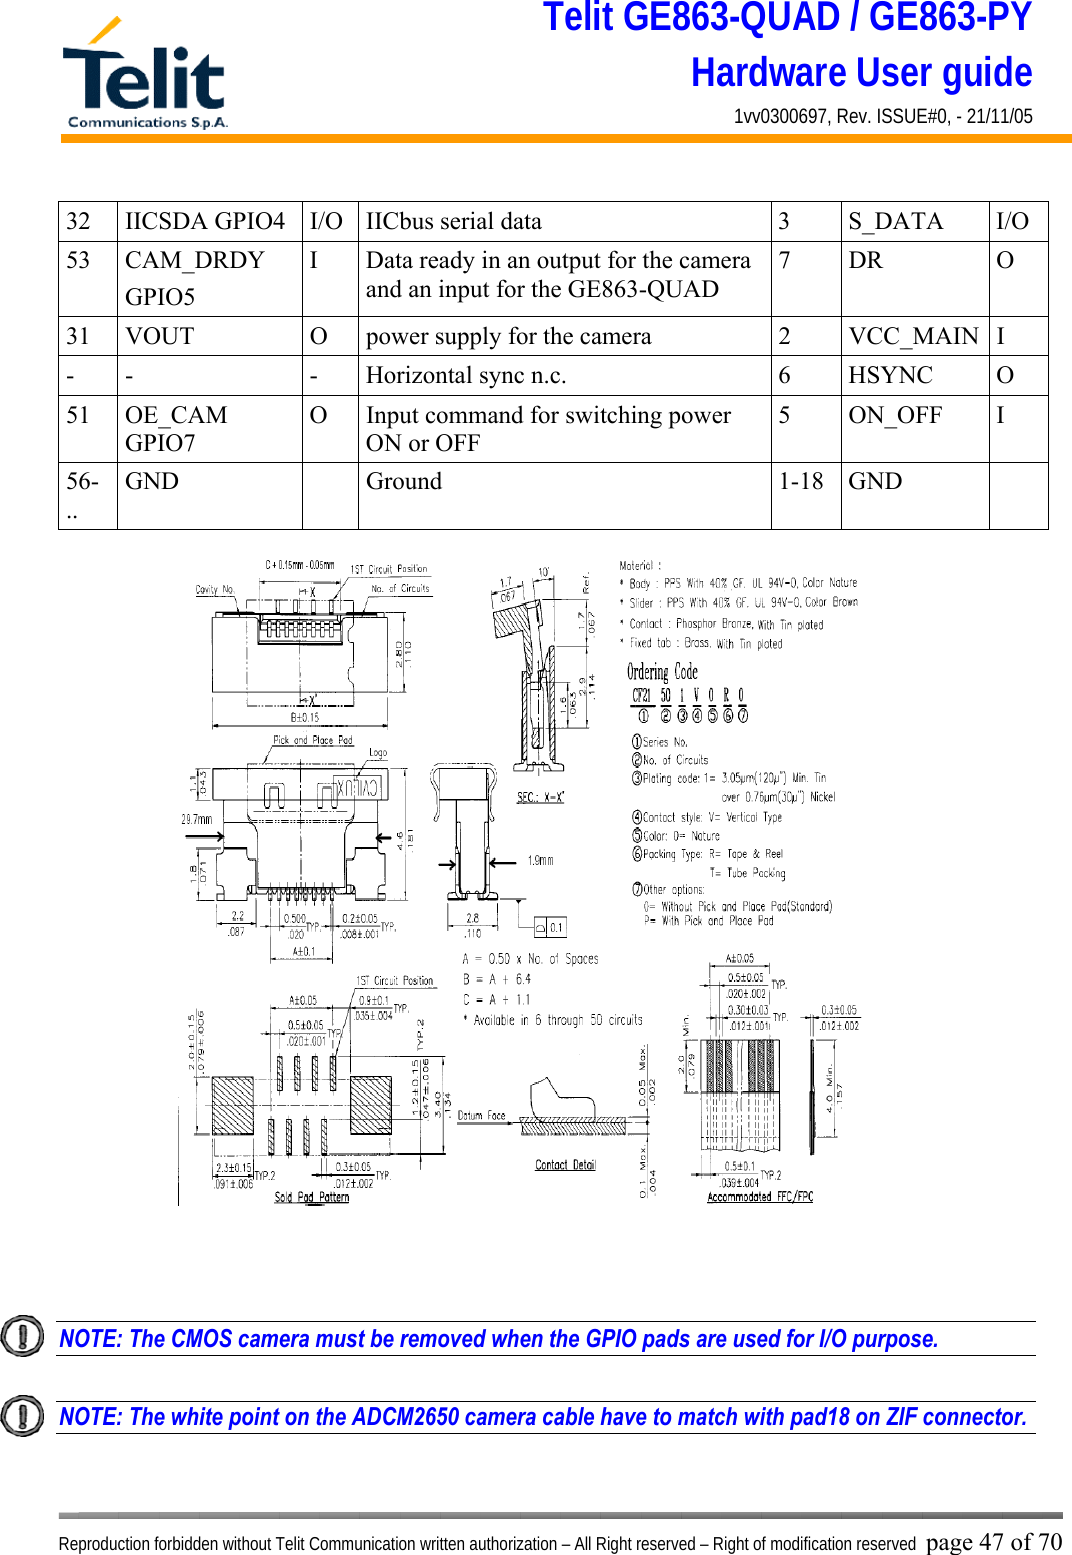 Telit GE863-QUAD / GE863-PY Hardware User guide 1vv0300697, Rev. ISSUE#0, - 21/11/05    Reproduction forbidden without Telit Communication written authorization – All Right reserved – Right of modification reserved page 47 of 70 32  IICSDA GPIO4  I/O  IICbus serial data  3  S_DATA  I/O 53 CAM_DRDY GPIO5 I  Data ready in an output for the camera and an input for the GE863-QUAD  7 DR  O 31  VOUT  O  power supply for the camera   2  VCC_MAIN I -  -  -  Horizontal sync n.c.  6  HSYNC  O 51 OE_CAM GPIO7 O  Input command for switching power ON or OFF 5 ON_OFF I 56-.. GND  Ground  1-18 GND     NOTE: The CMOS camera must be removed when the GPIO pads are used for I/O purpose.  NOTE: The white point on the ADCM2650 camera cable have to match with pad18 on ZIF connector.  